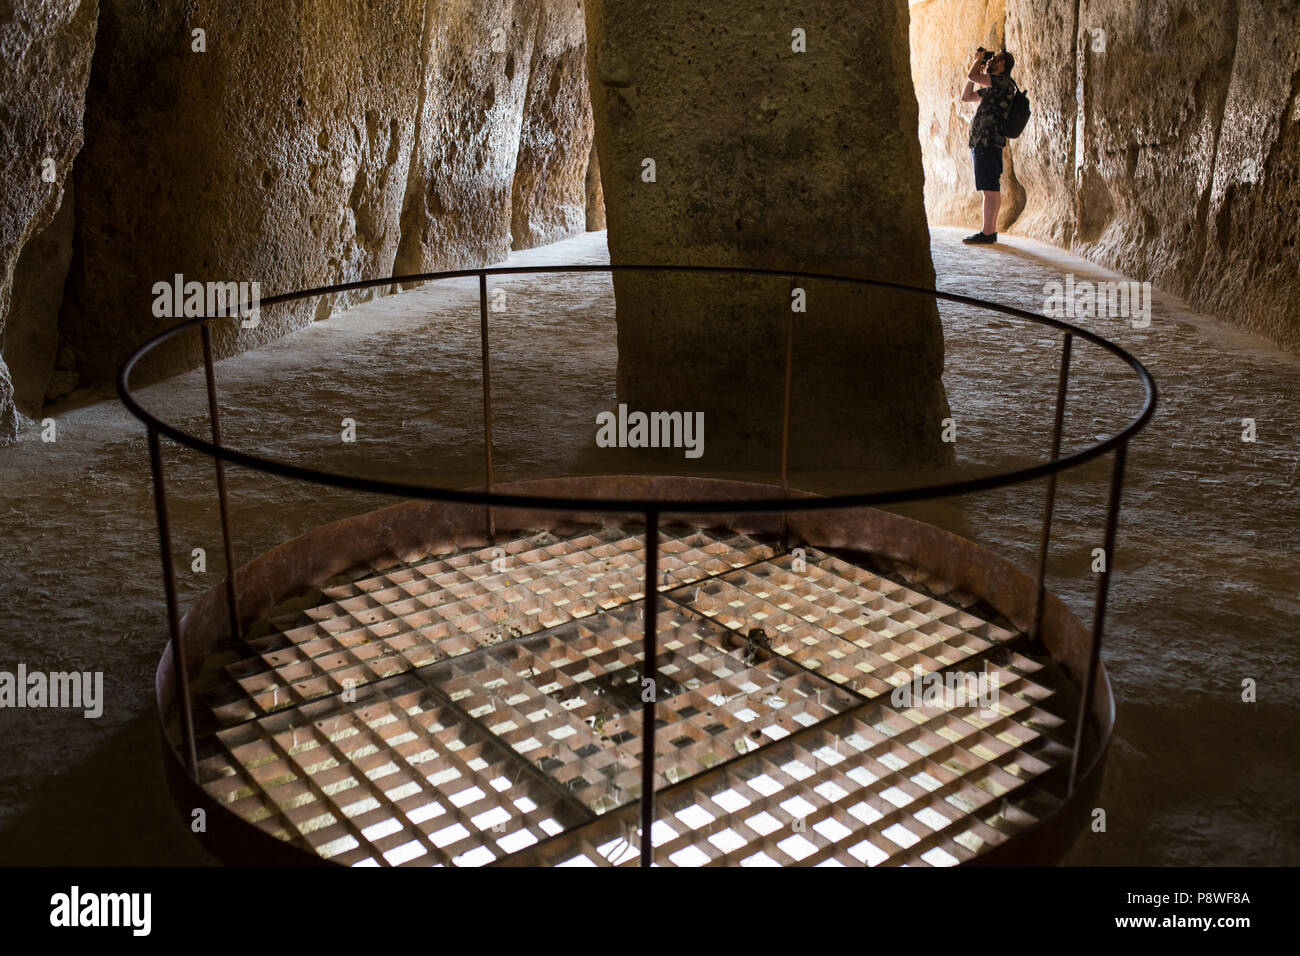 Antequera, Spain - July 10th, 2018: Visitor takes pictures at interior chamber of Dolmen of Menga, Antequera, Spain Stock Photo